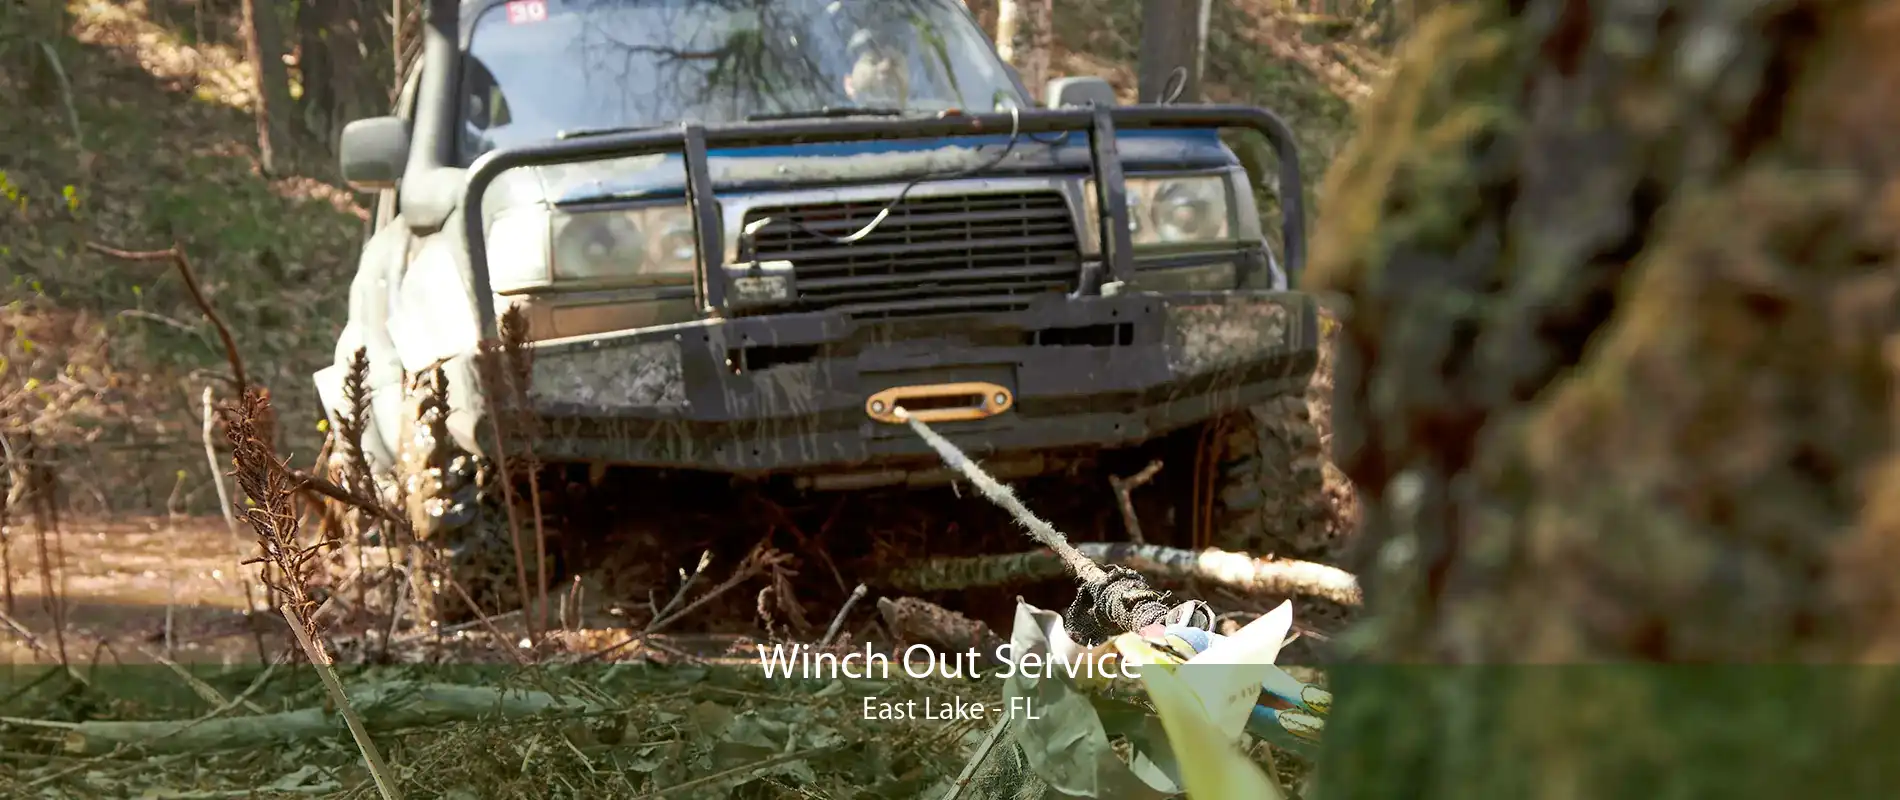 Winch Out Service East Lake - FL